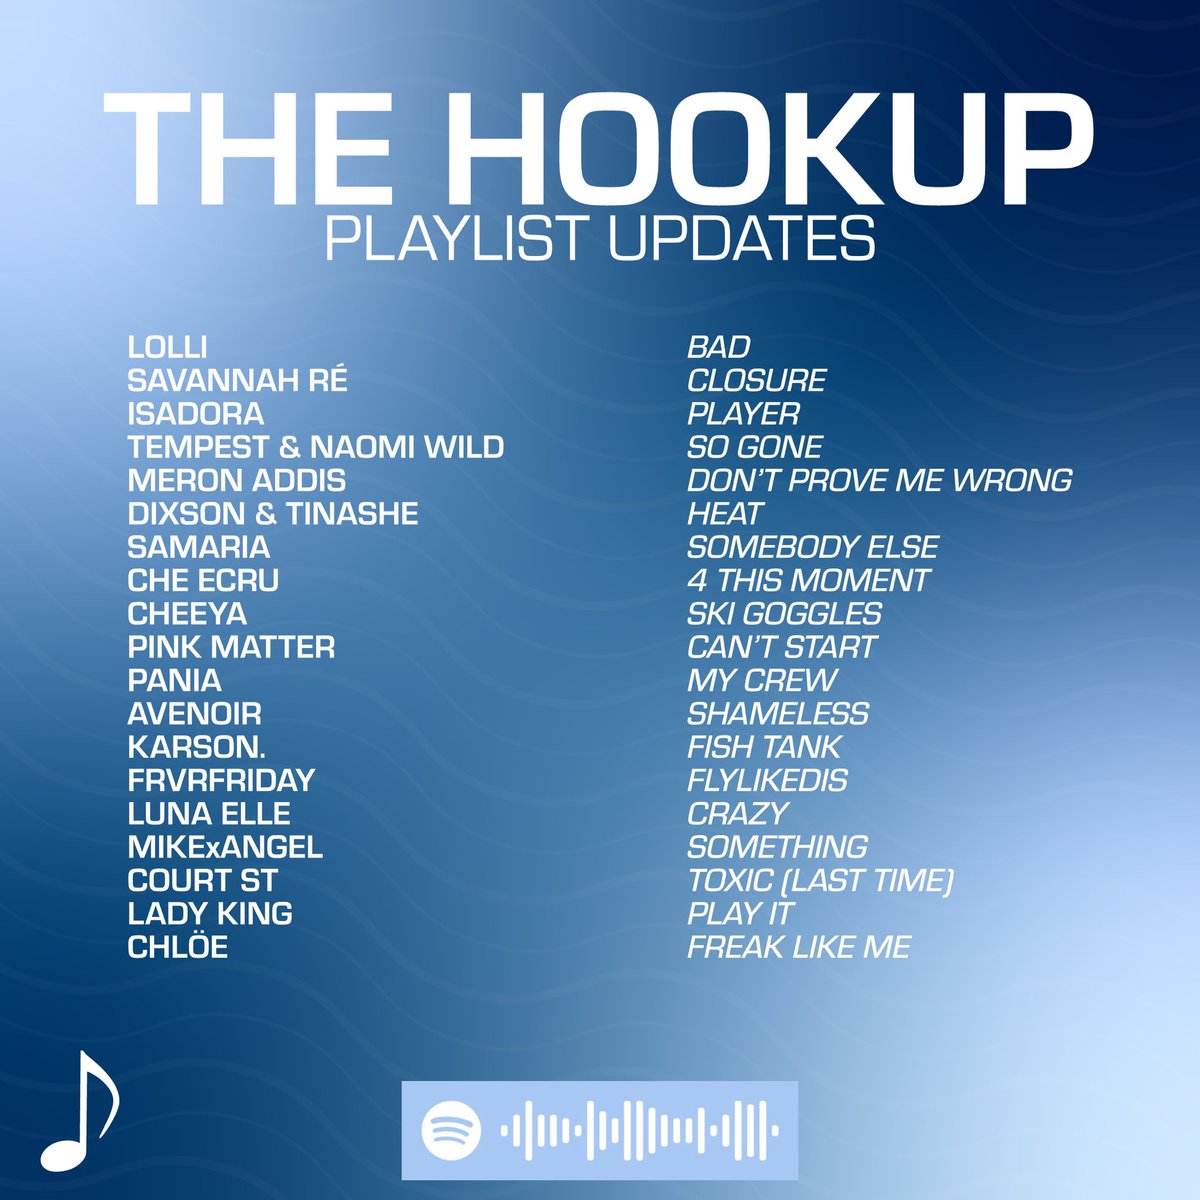 🎣 THE HOOKUP has been updated with new music from

@SavannahReMusic, @yeaimtempest, @meronaddismusic, @DIXSON, @findlovergirl, @Cheecru, @pinkmatterband, @notpaniaxo, @whoakarson, @frvrfriday, @LunaEllemusic & MORE

Check it out!

open.spotify.com/playlist/5VCVG…